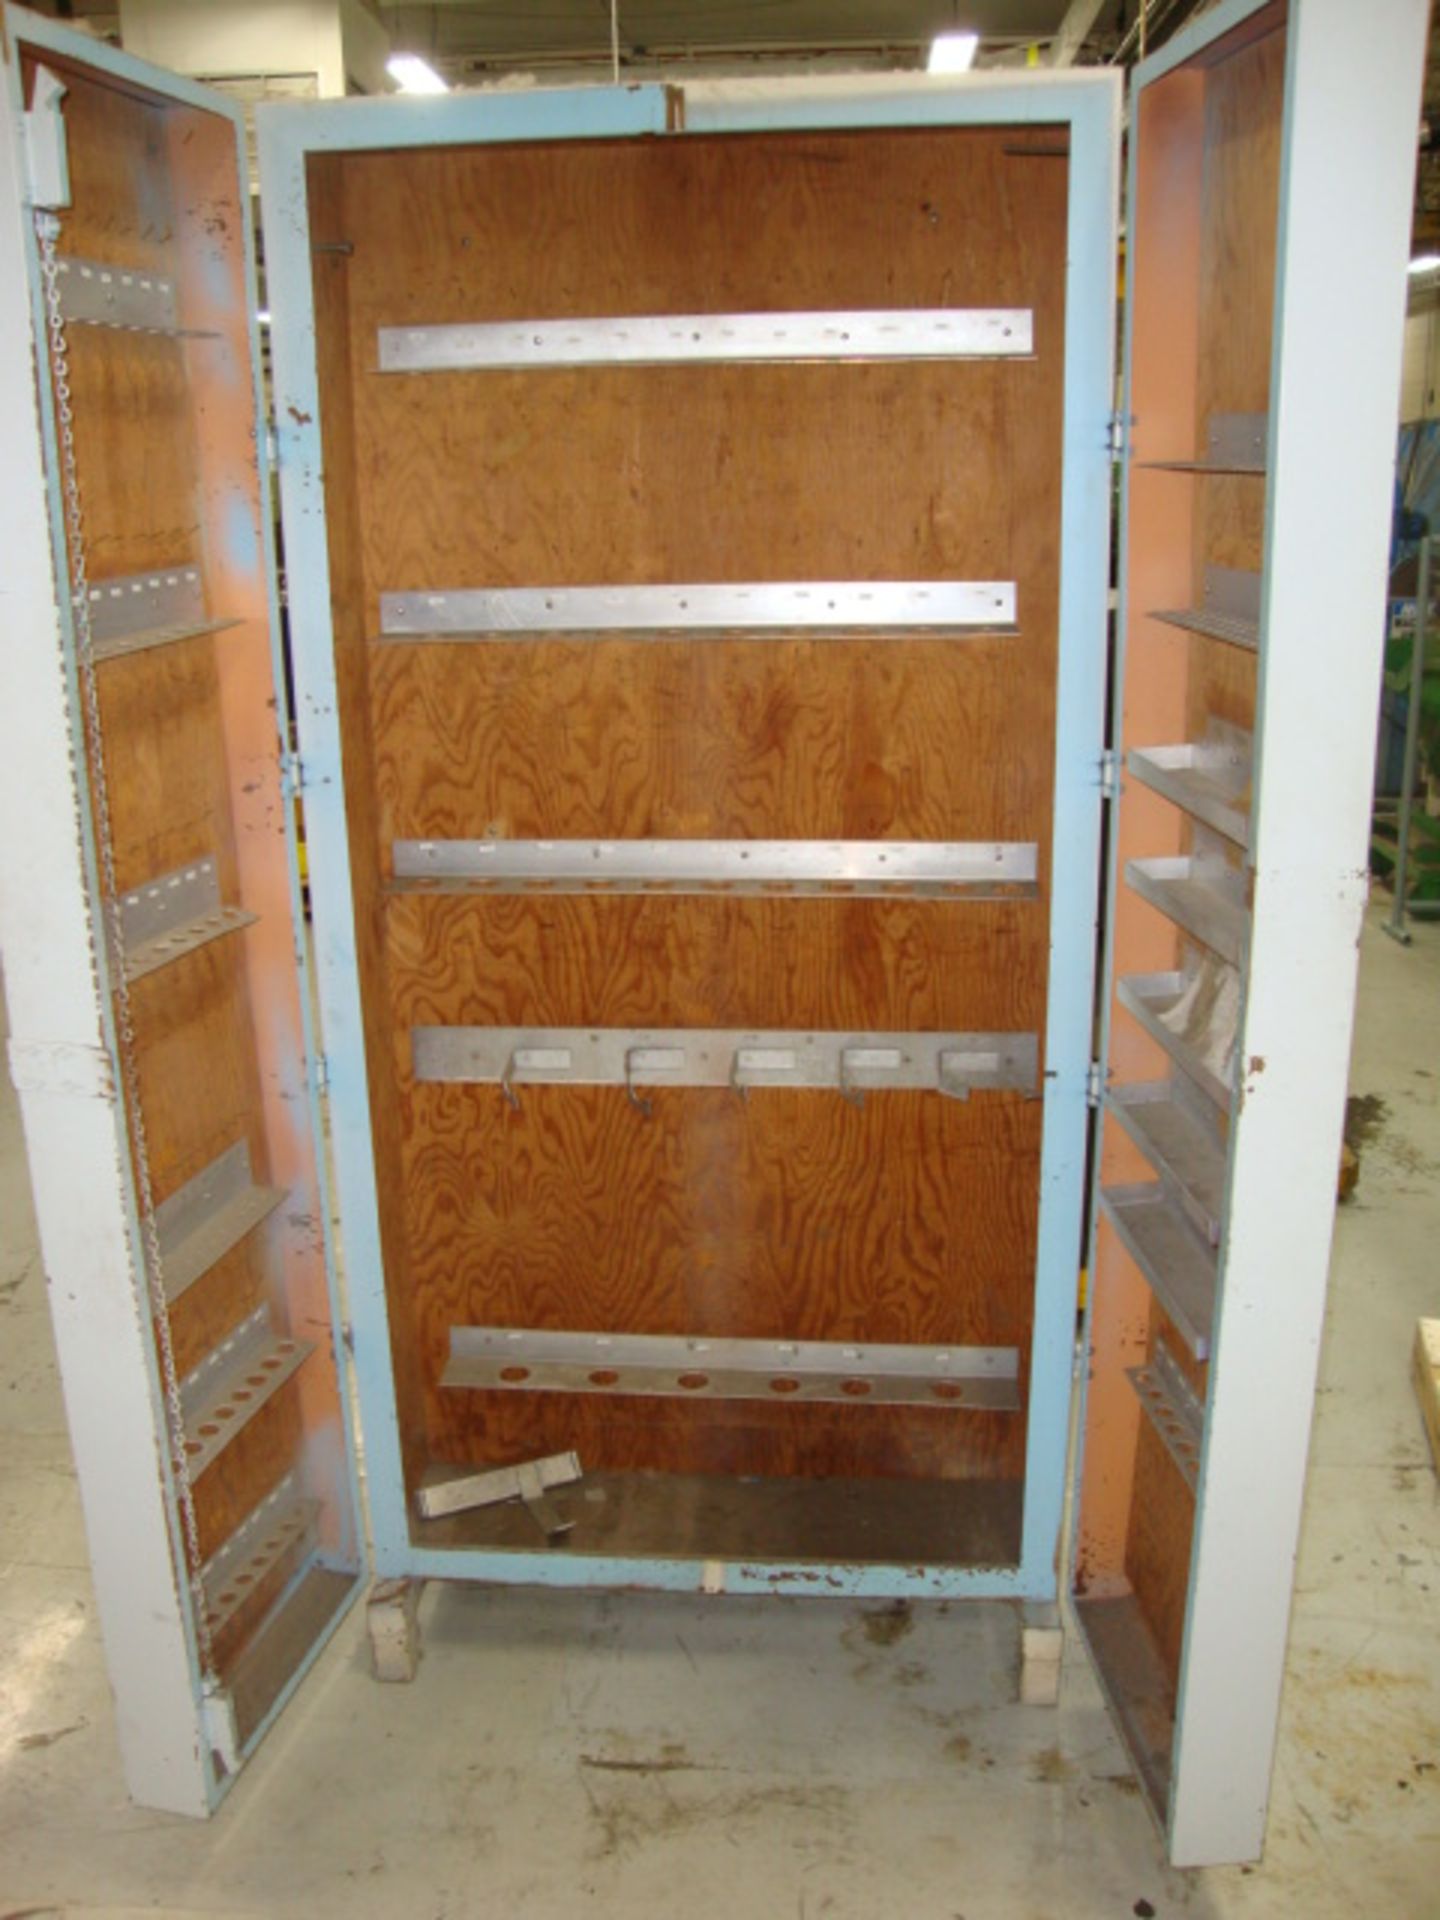 HD Storage Cabinet, approx. 36" x 16" x 78" tall - Image 2 of 4